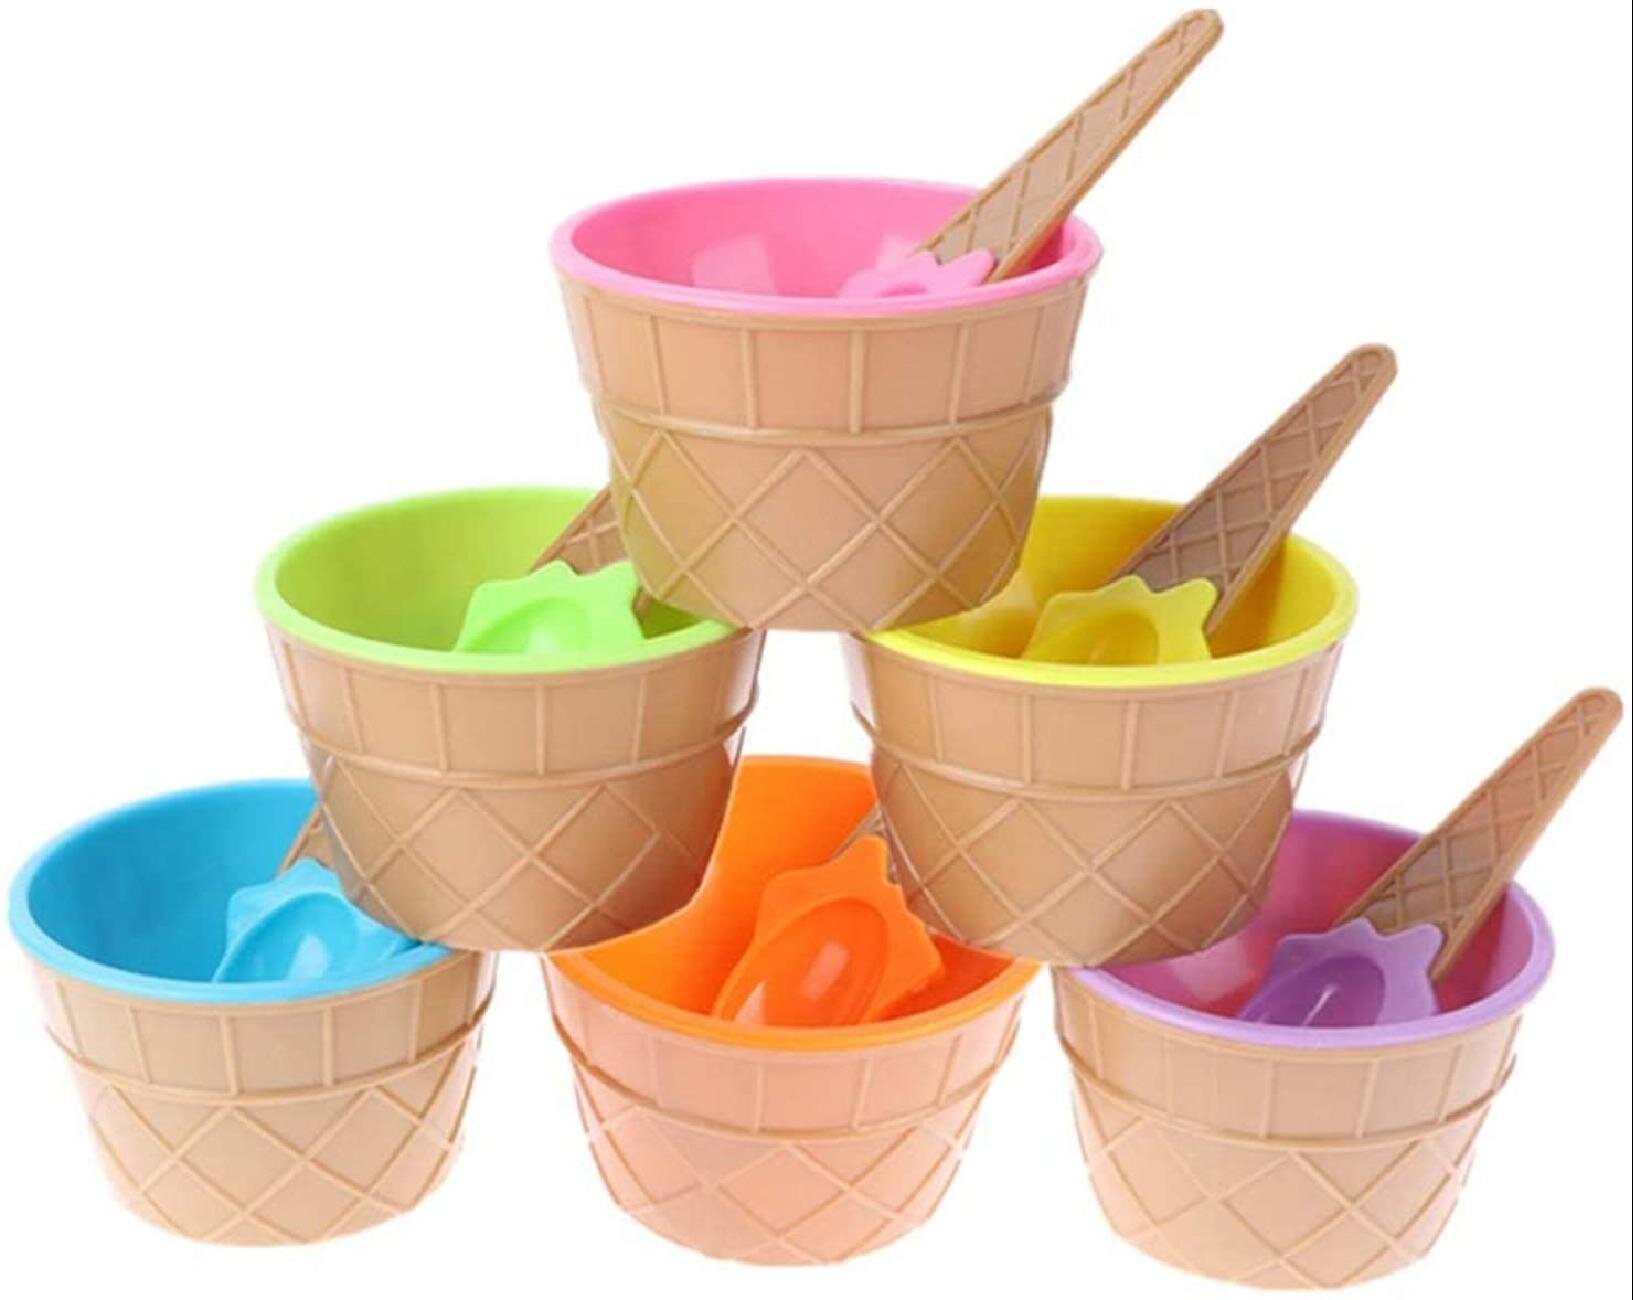 Kids Plastic Ice Cream Bowls Spoons Set of 4 Durable Cup Magic Color Change 